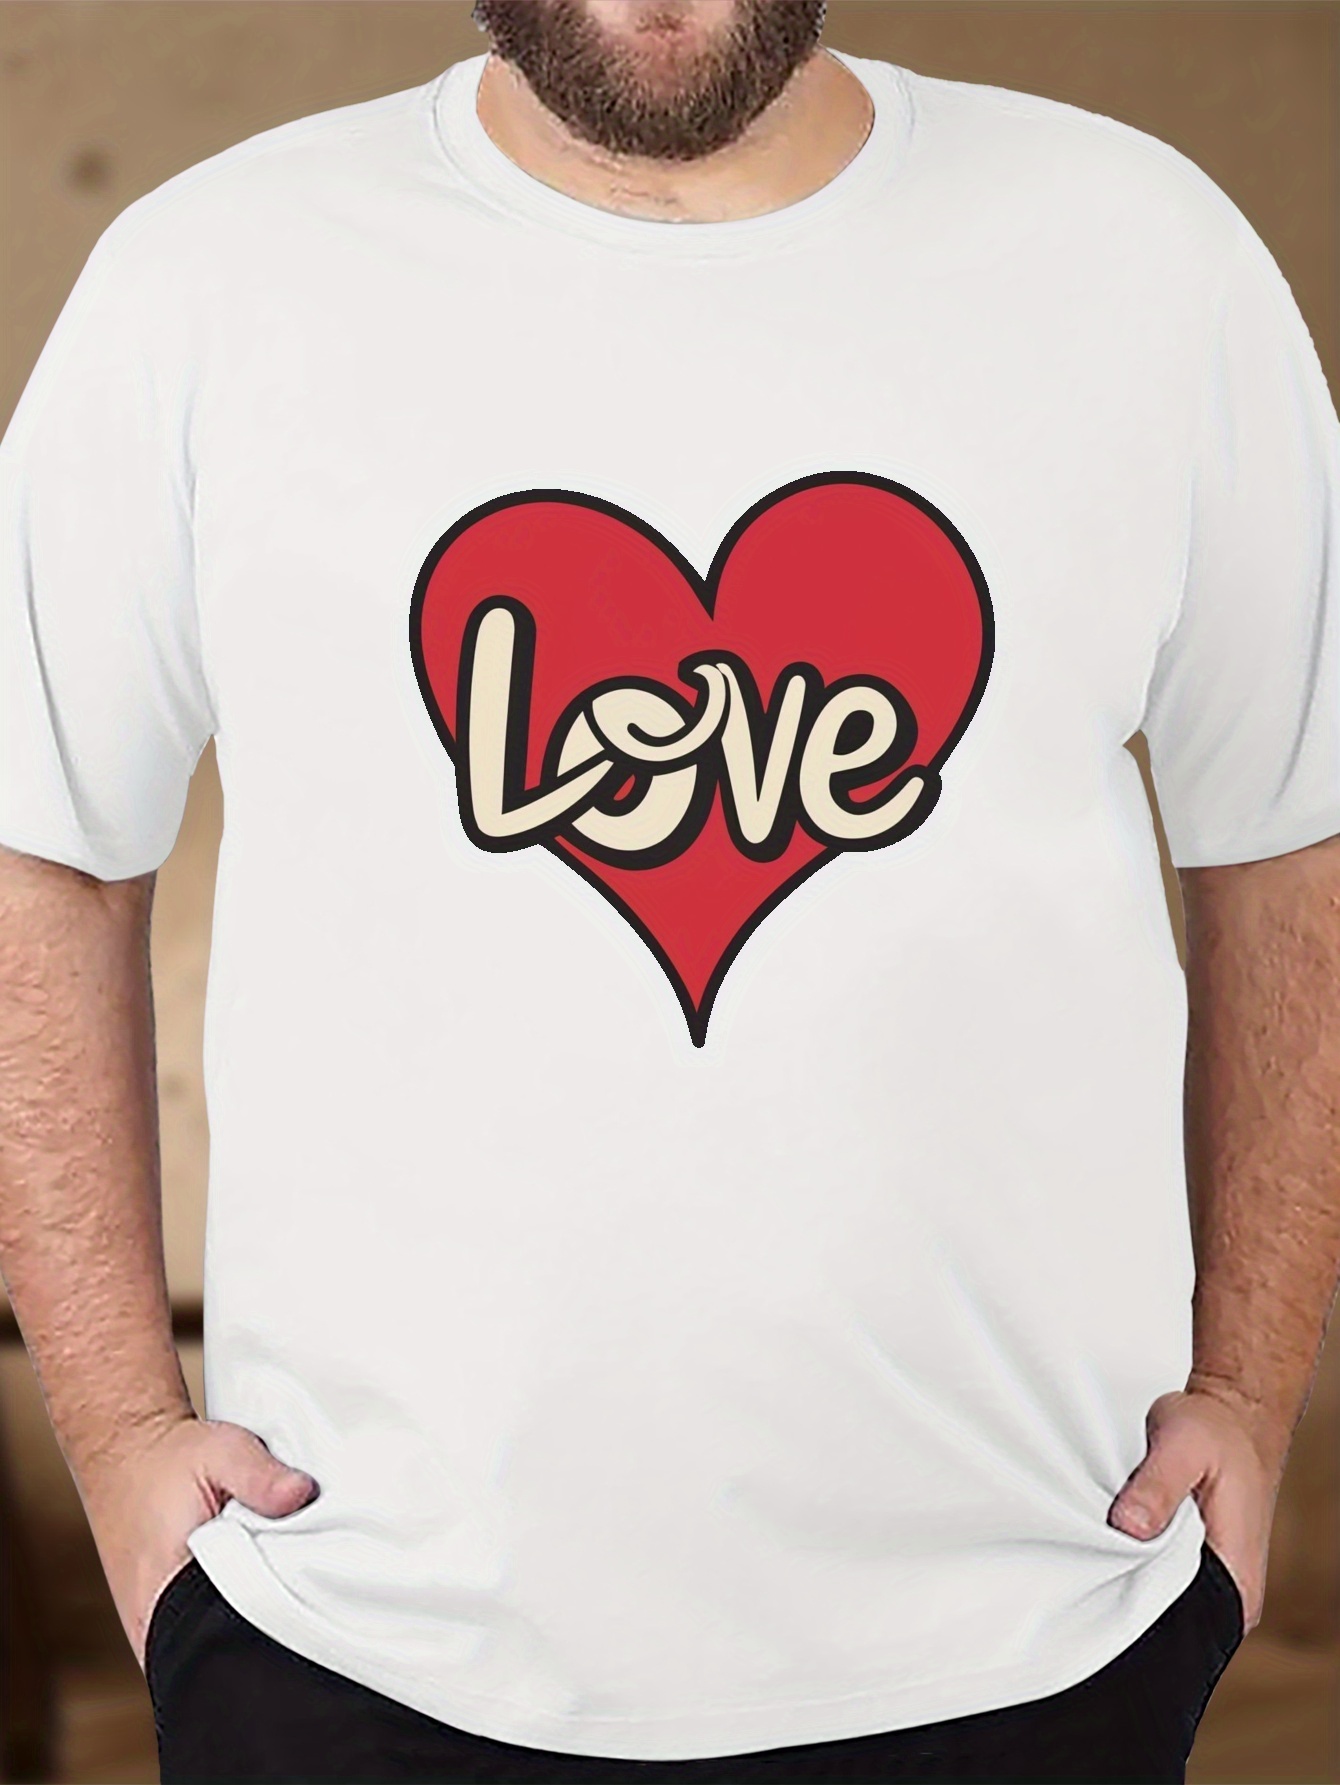 Plus Size Casual Tees, Men's Love Heart Graphic Print T-shirt For Summer,  Men's Clothing